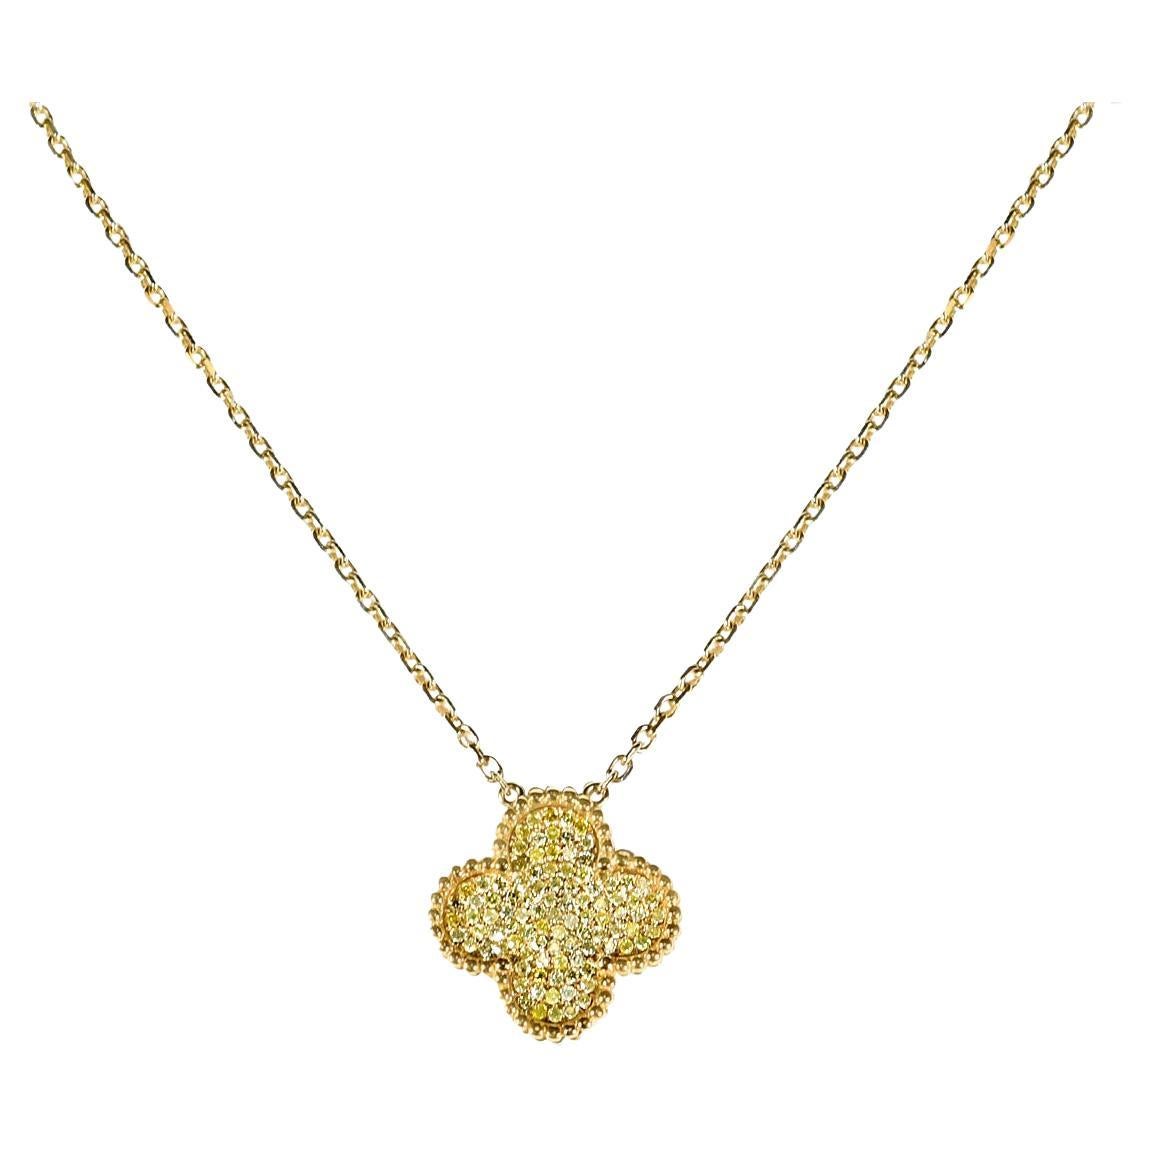 NWT $6, 042 Important 18KT Gold Fancy Yellow Diamond Clover Pendant Necklace